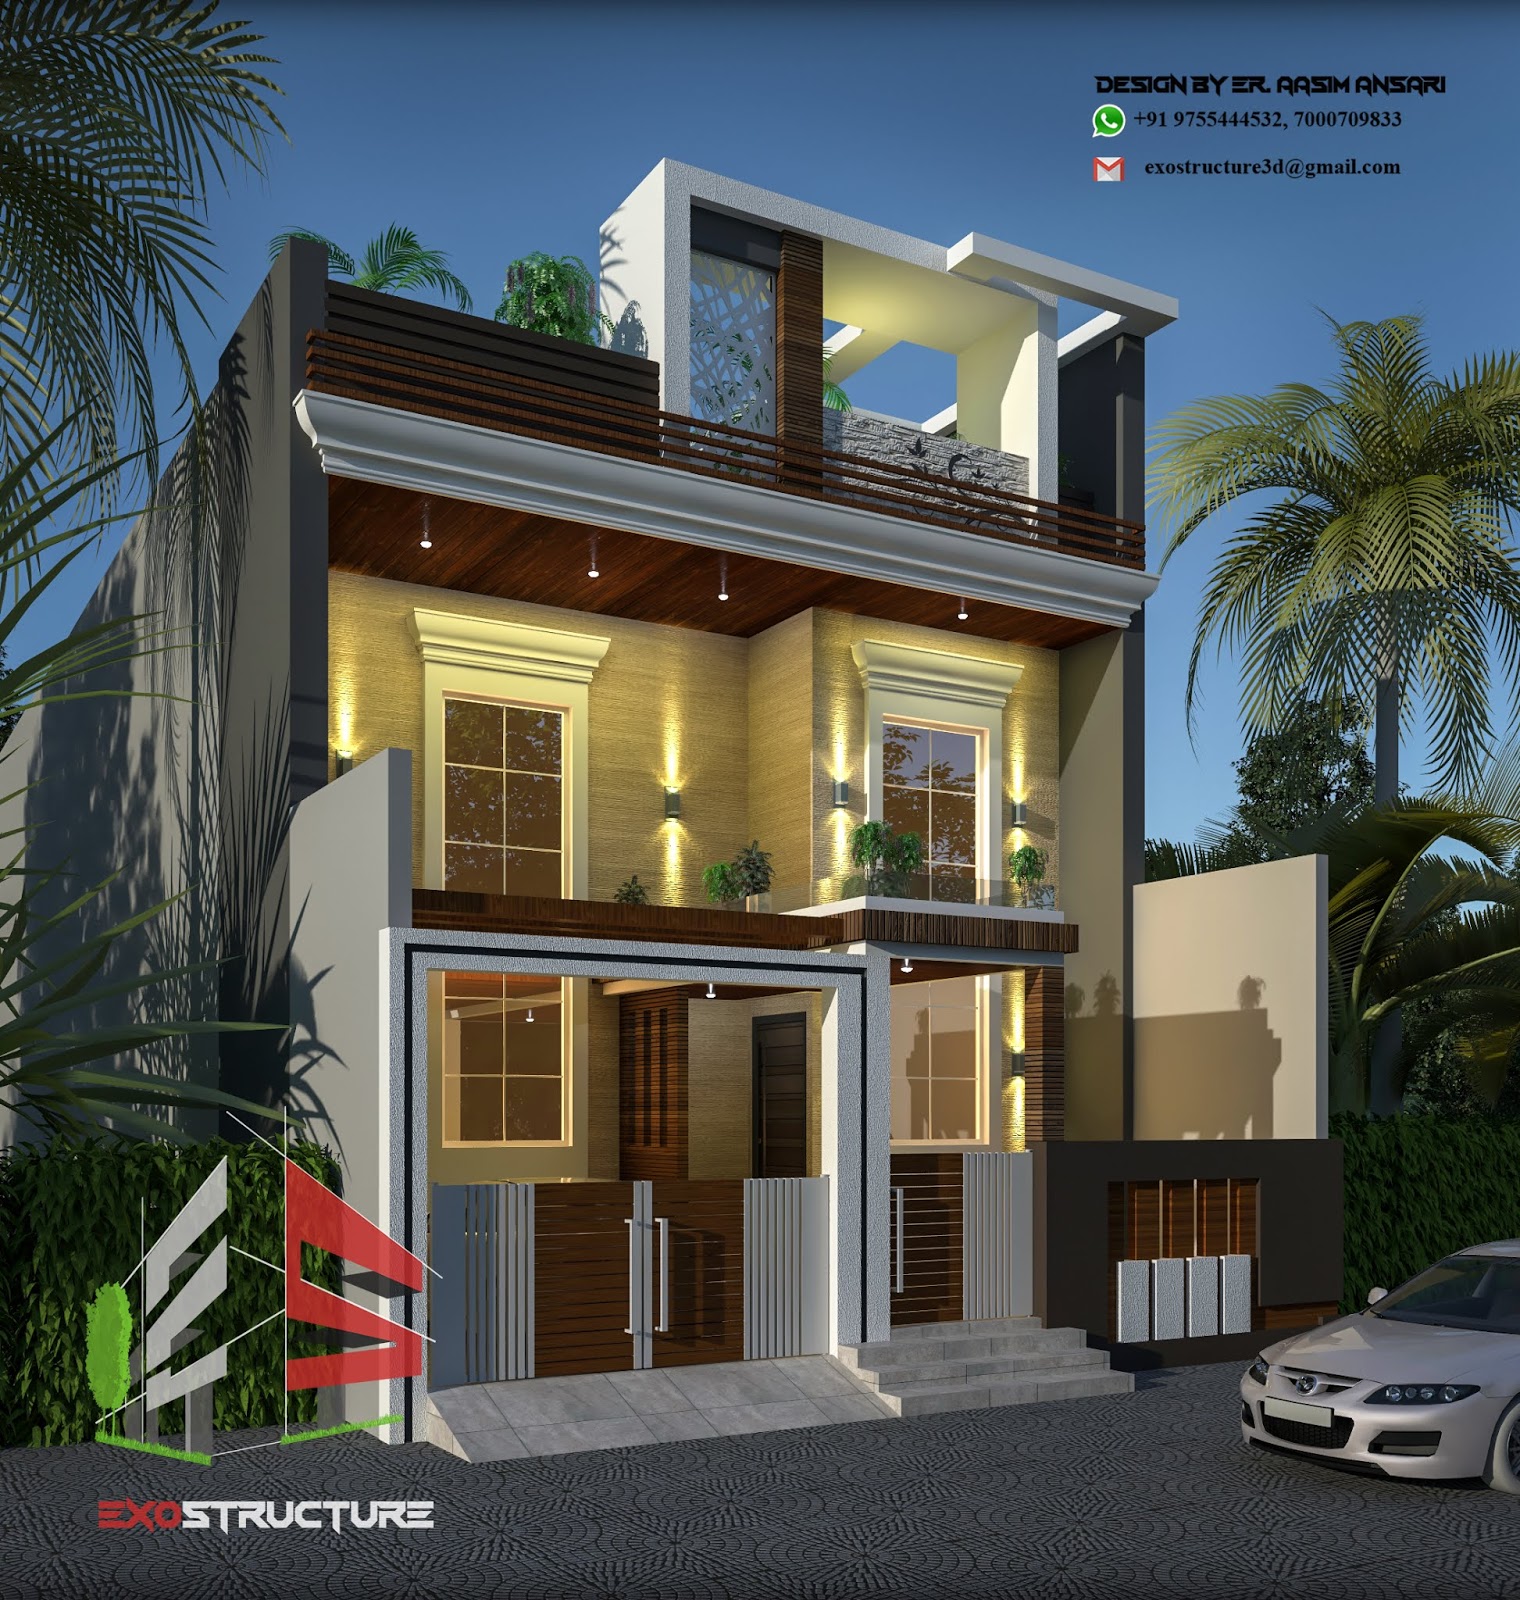 Modern Villa Design With Traditional Touch | ExoStructure 3d Visualization